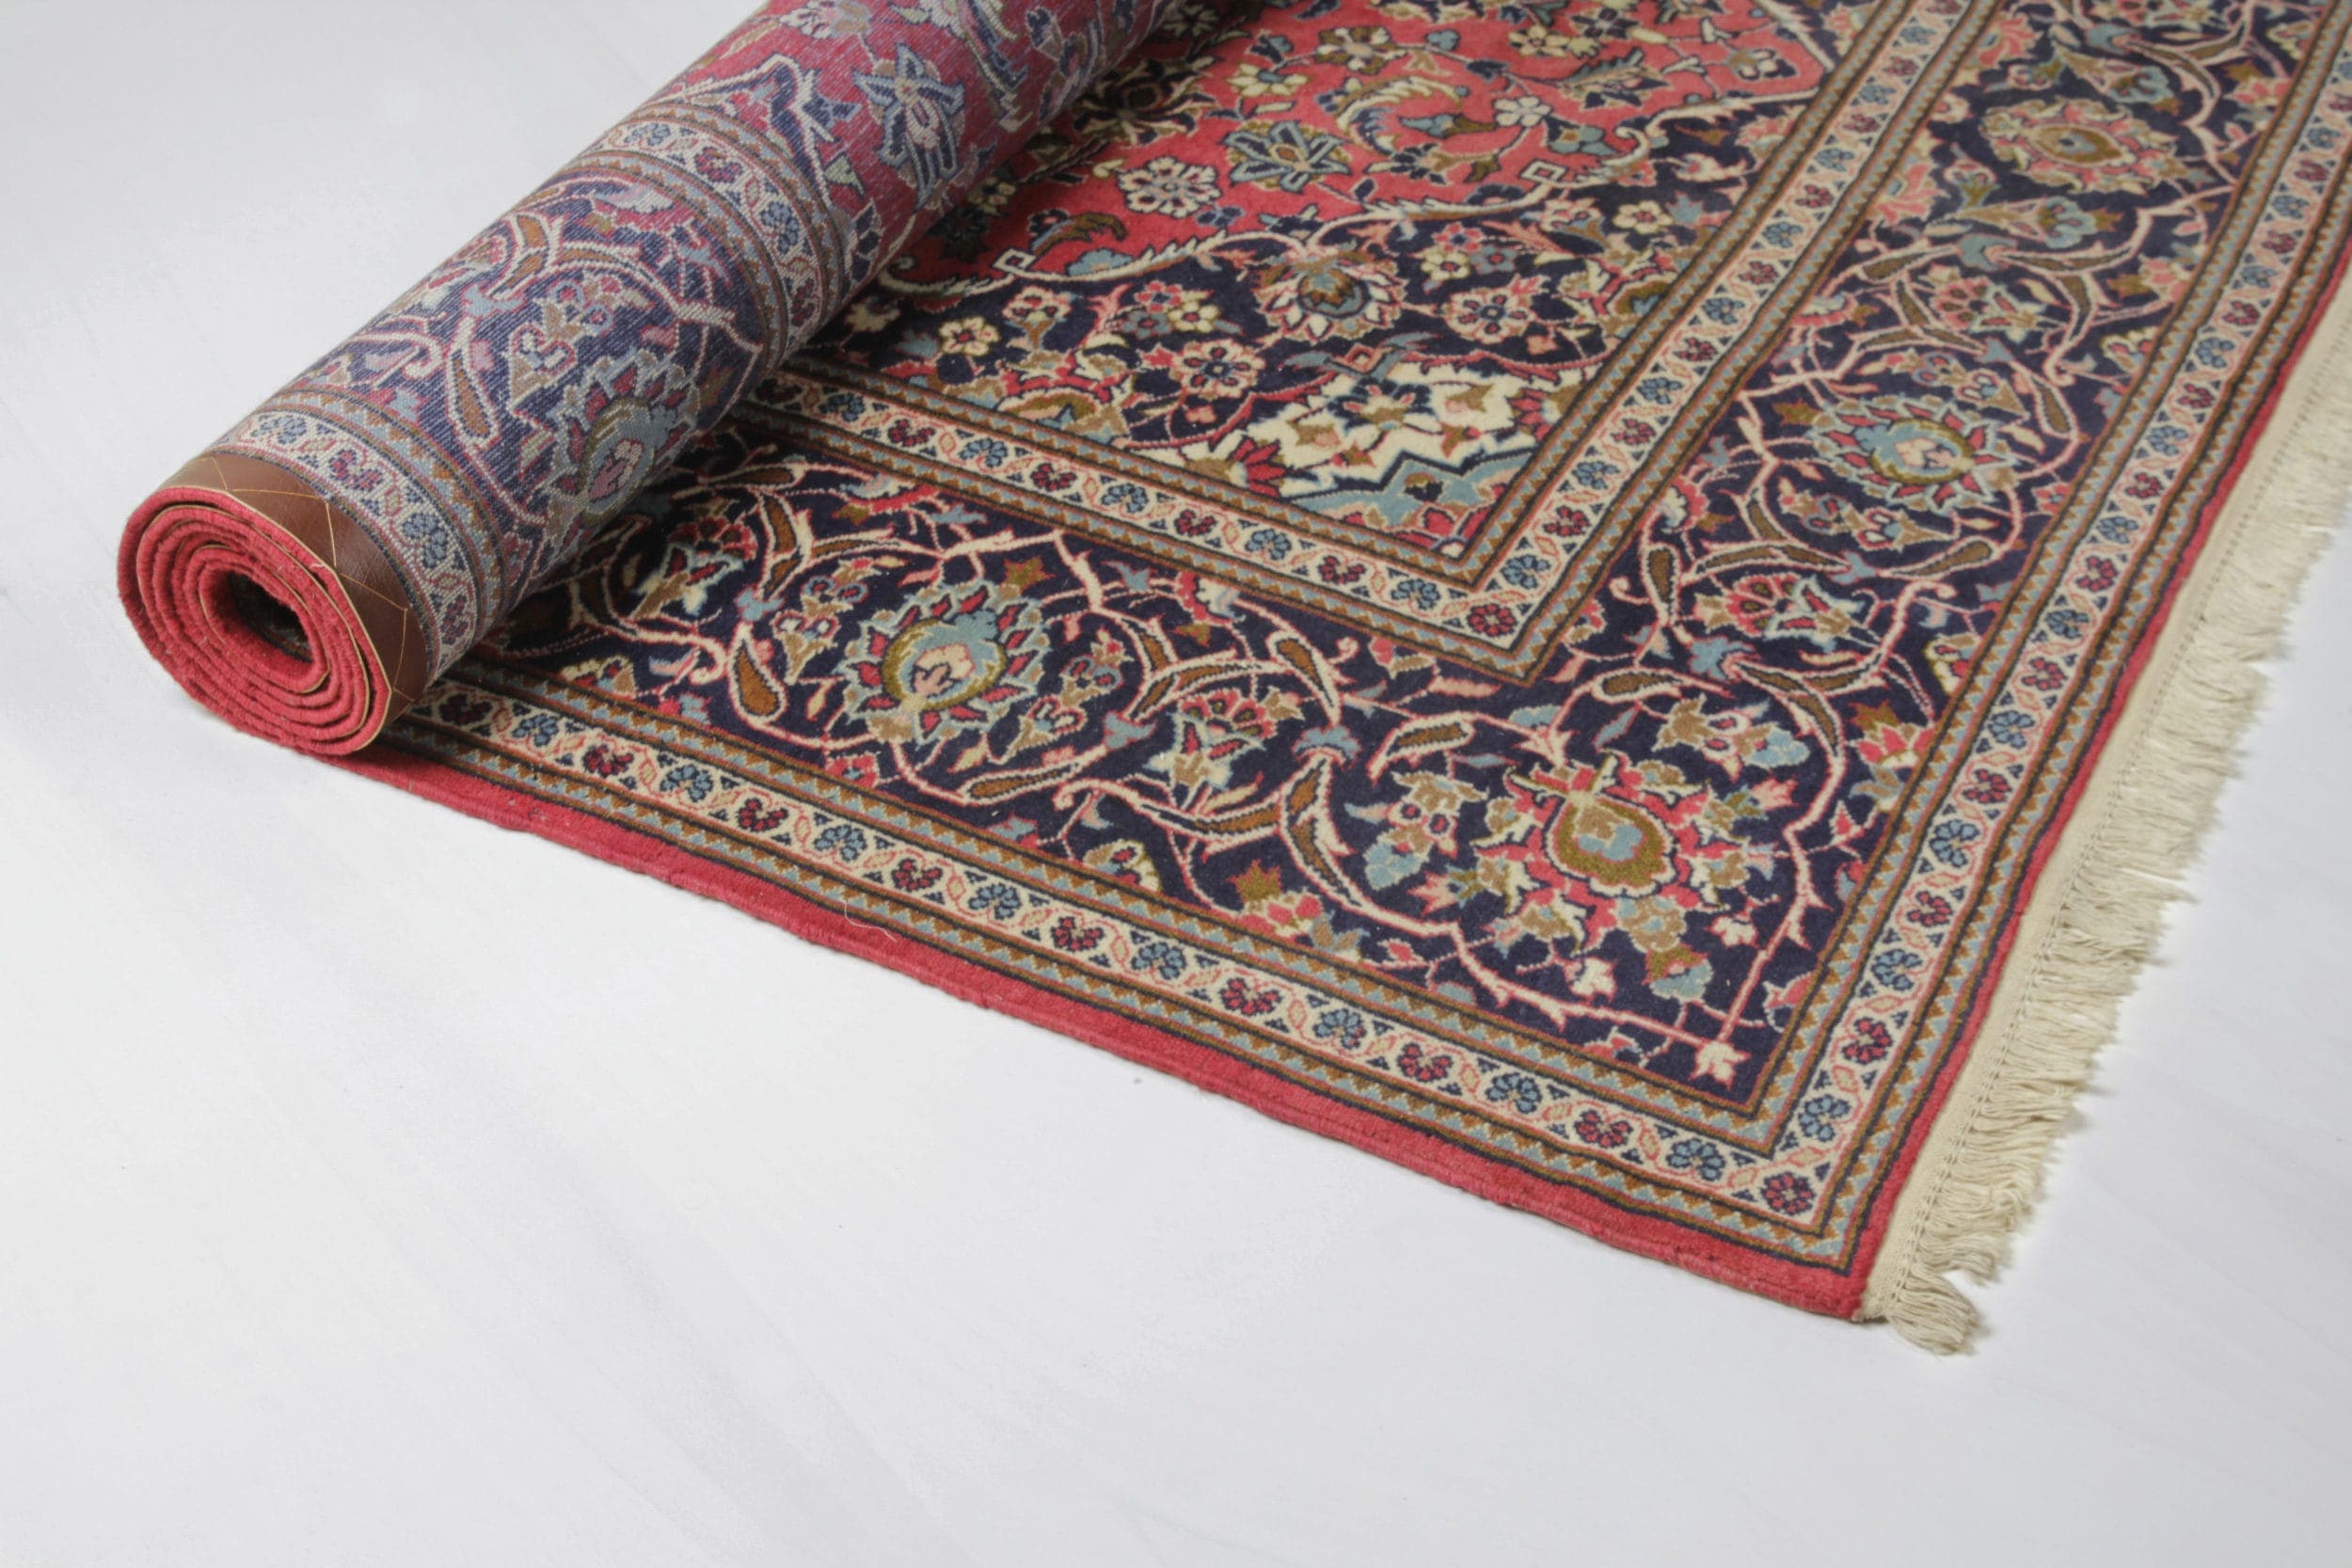 Carpet Abita | The three meter long carpet Abita is a real jewel. From a grand entrance for the bridal couple or the guest of honour to a cosy seating area at a garden picnic, the red, long vintage carpet with its stylish, oriental element is versatile. Carpet Abita looks especially impressive in combination with our other carpets, which you can also rent from us. So you can lay out a whole room wonderfully. | gotvintage Rental & Event Design